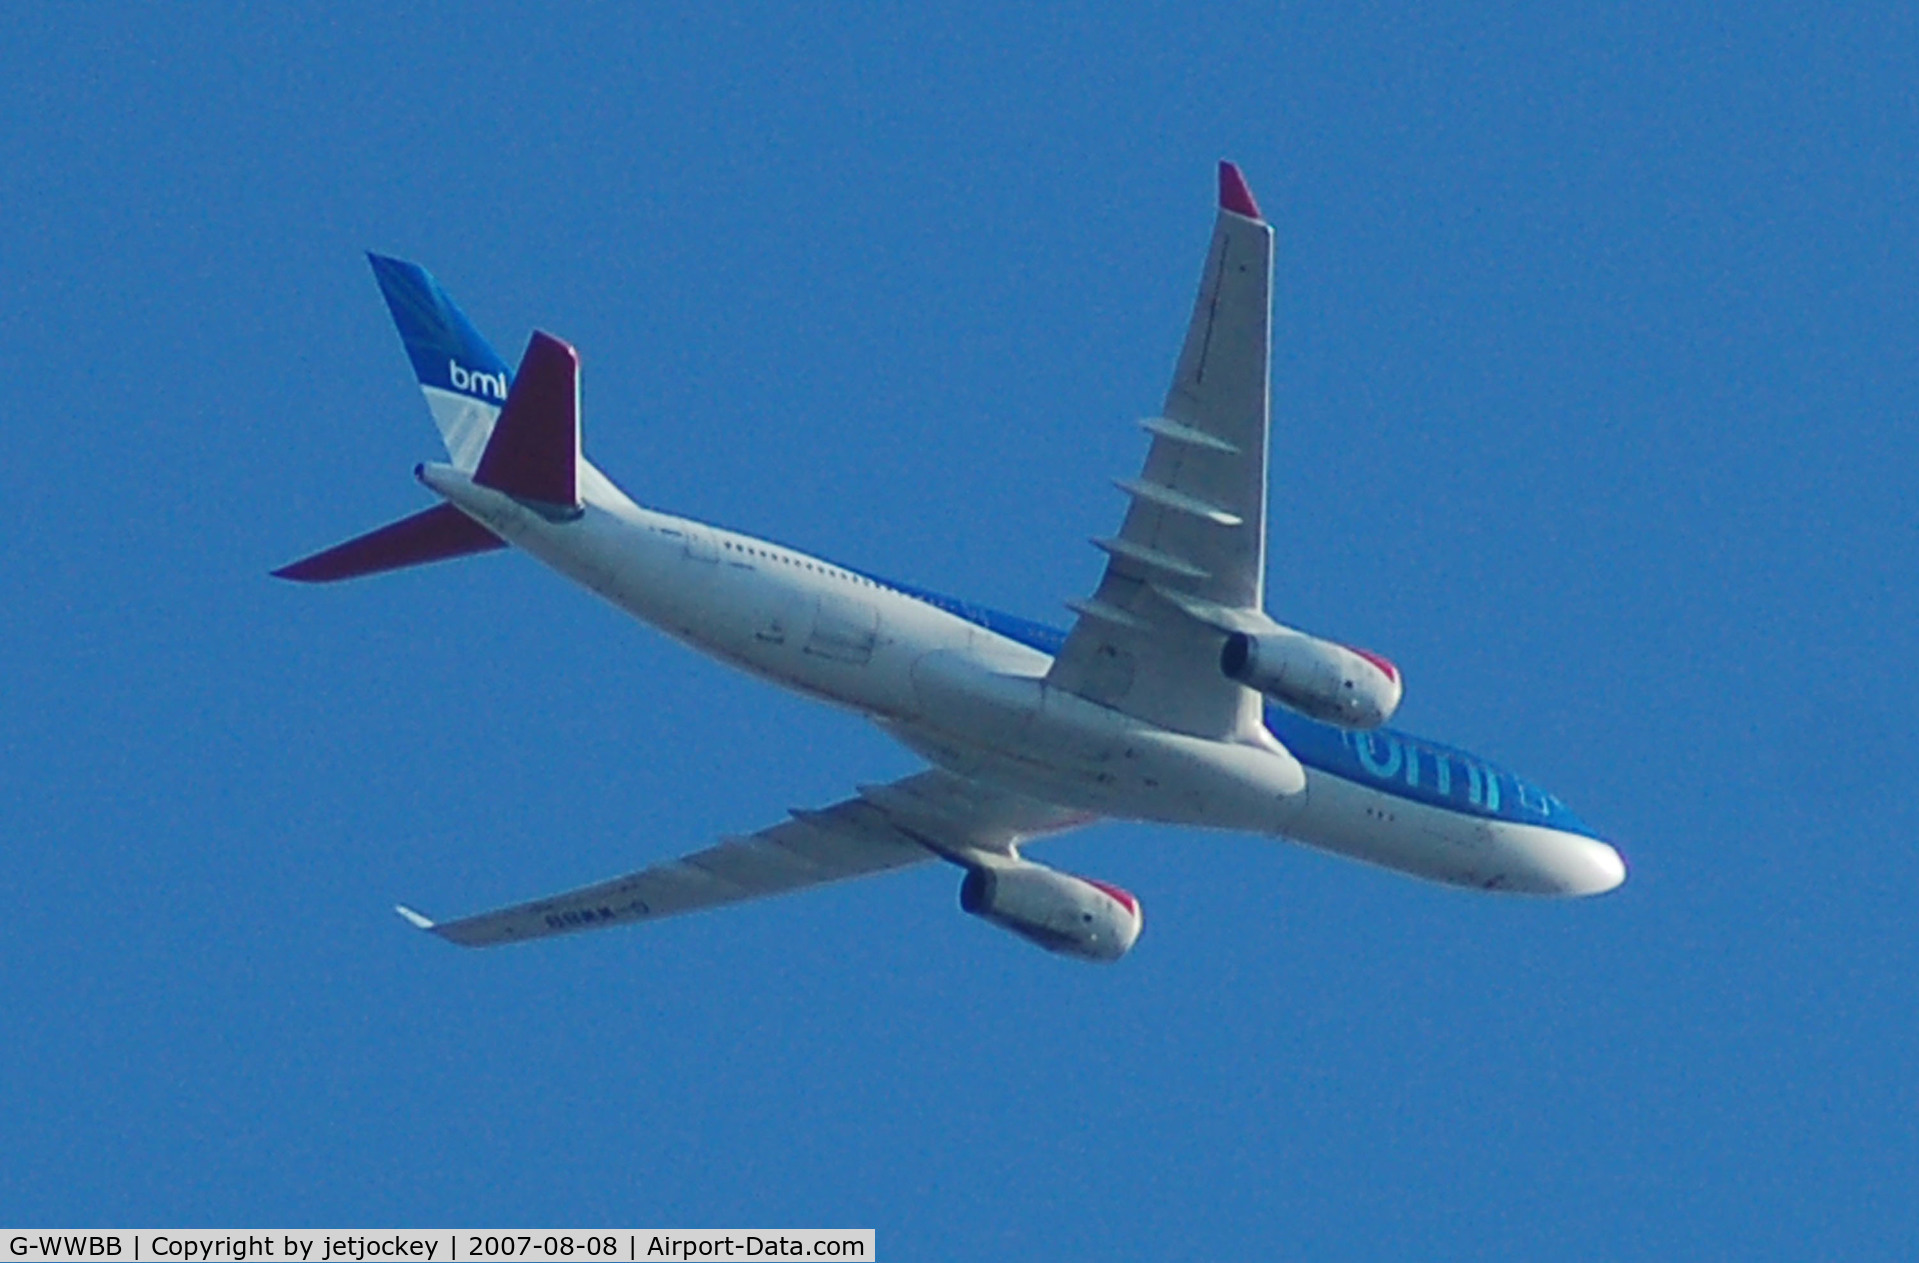 G-WWBB, 2001 Airbus A330-243 C/N 404, Passing over the house